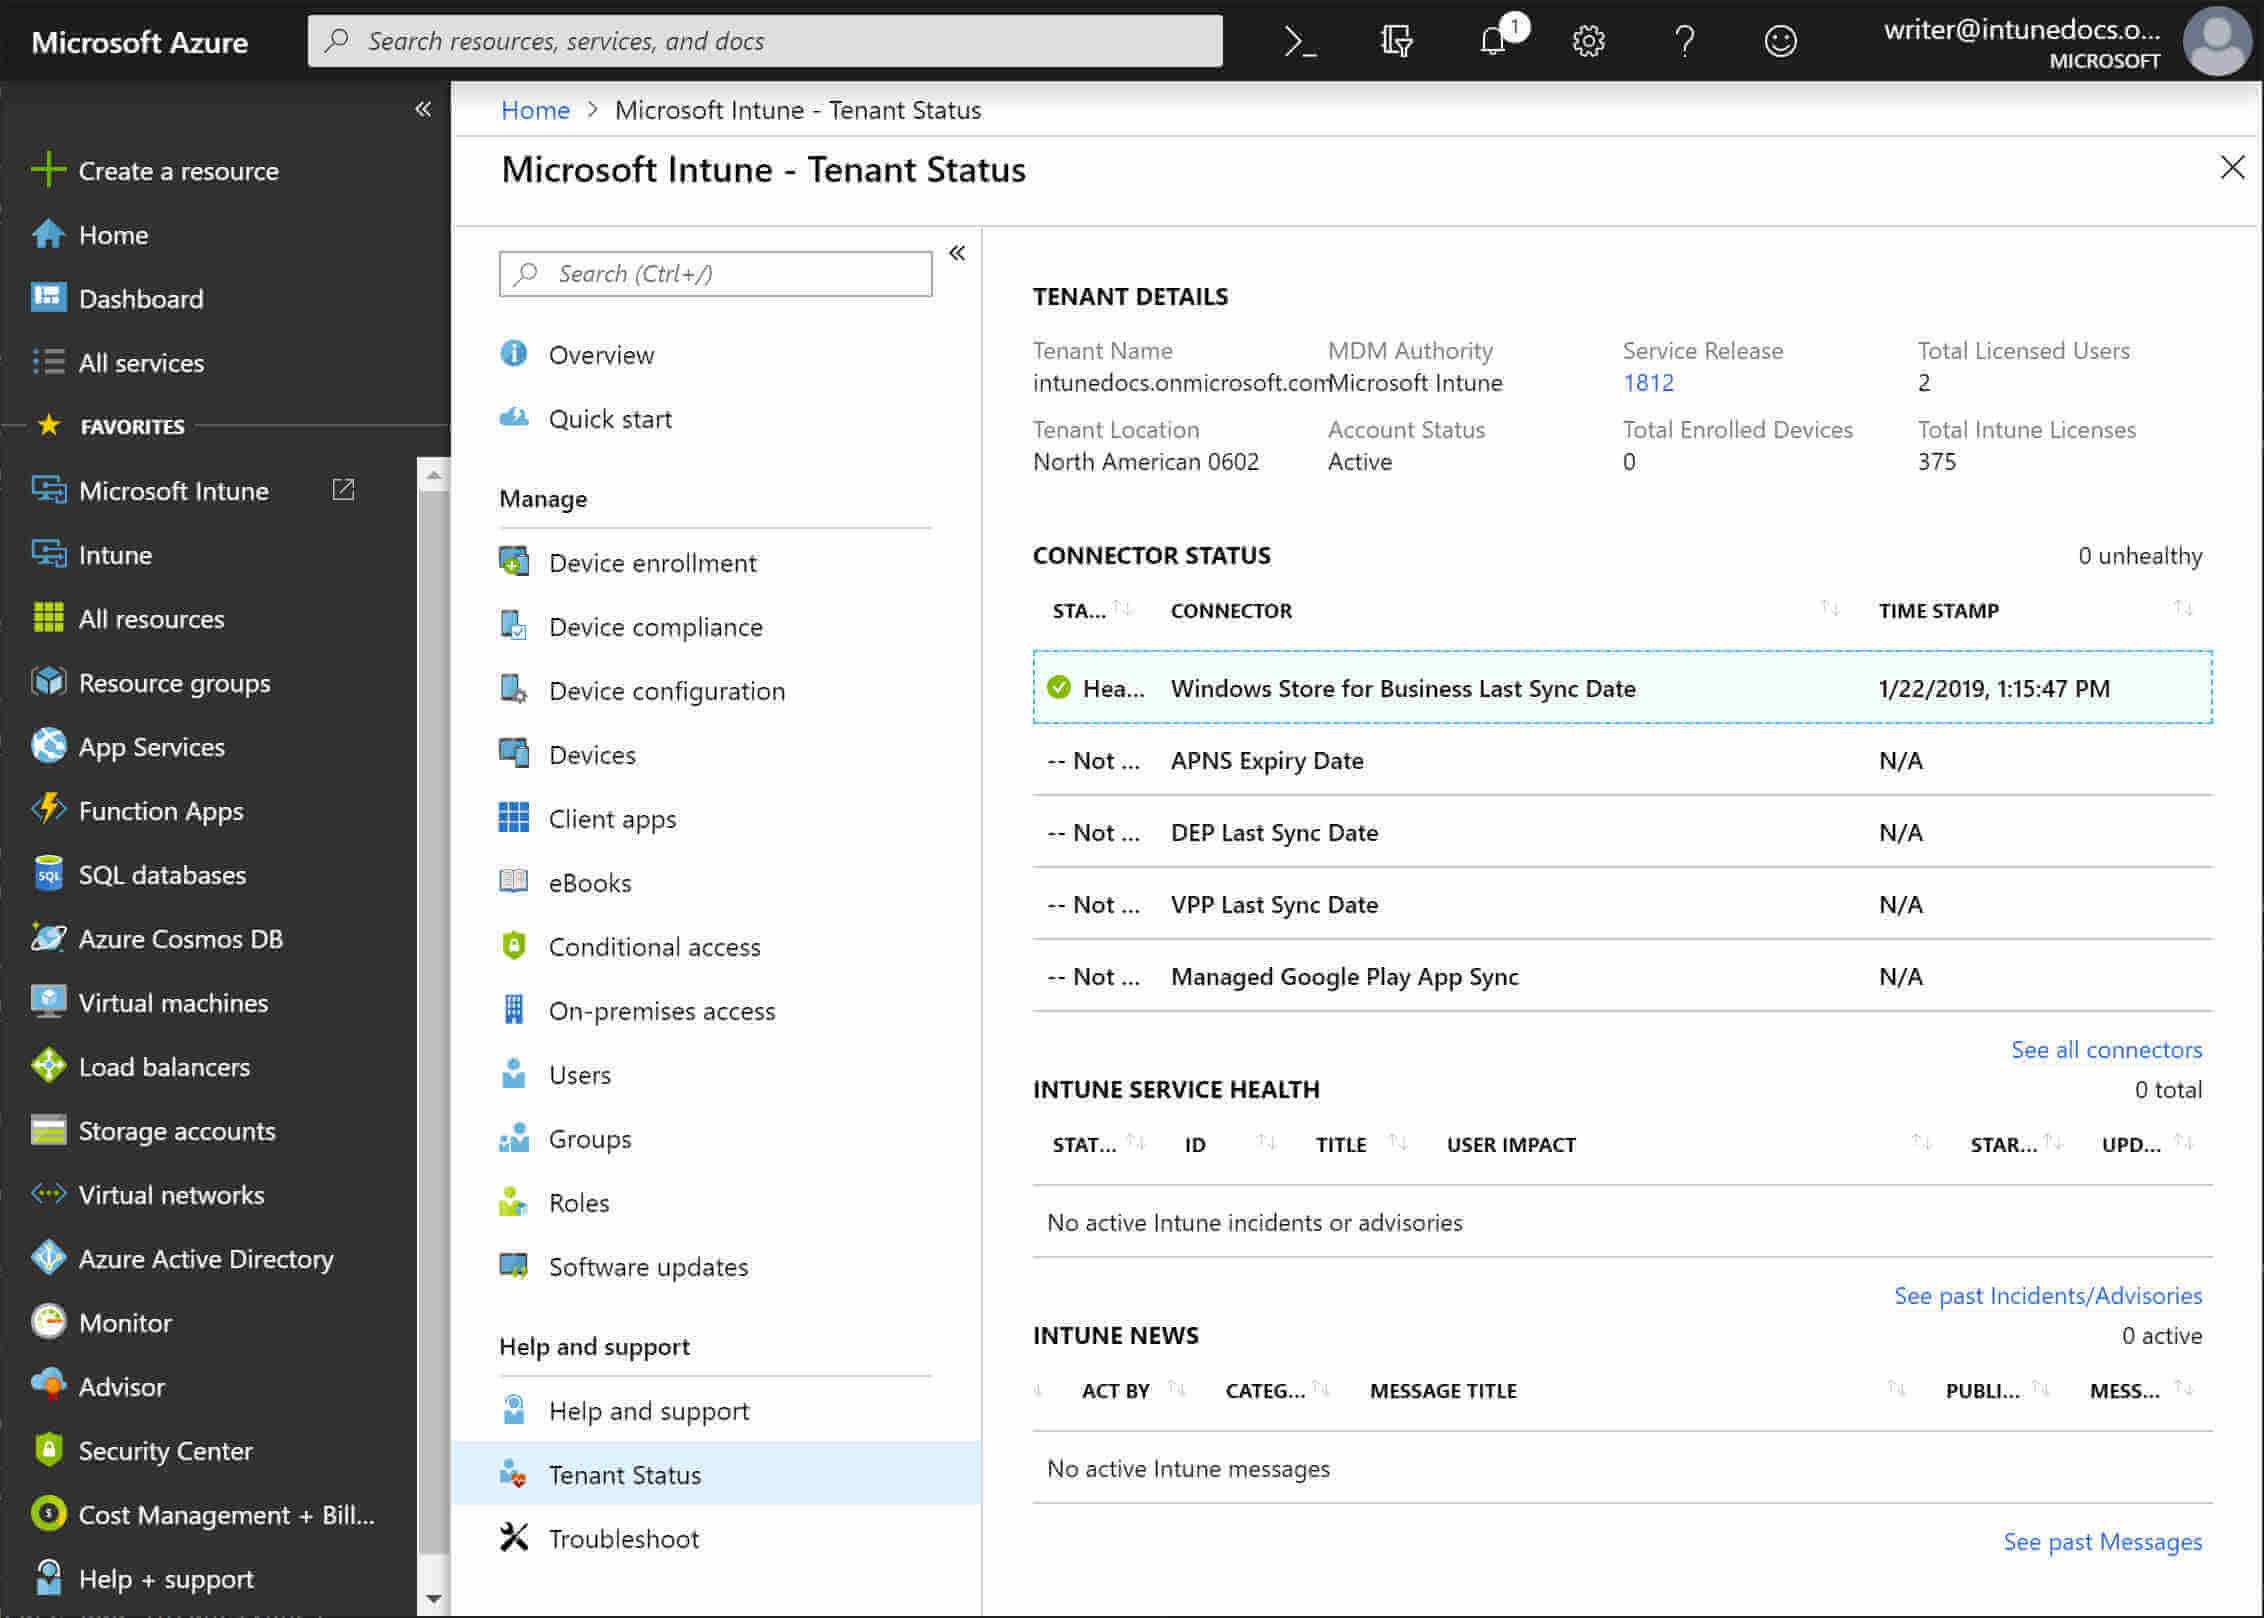 The MS Intune tab how to sync devices with Microsoft Intune